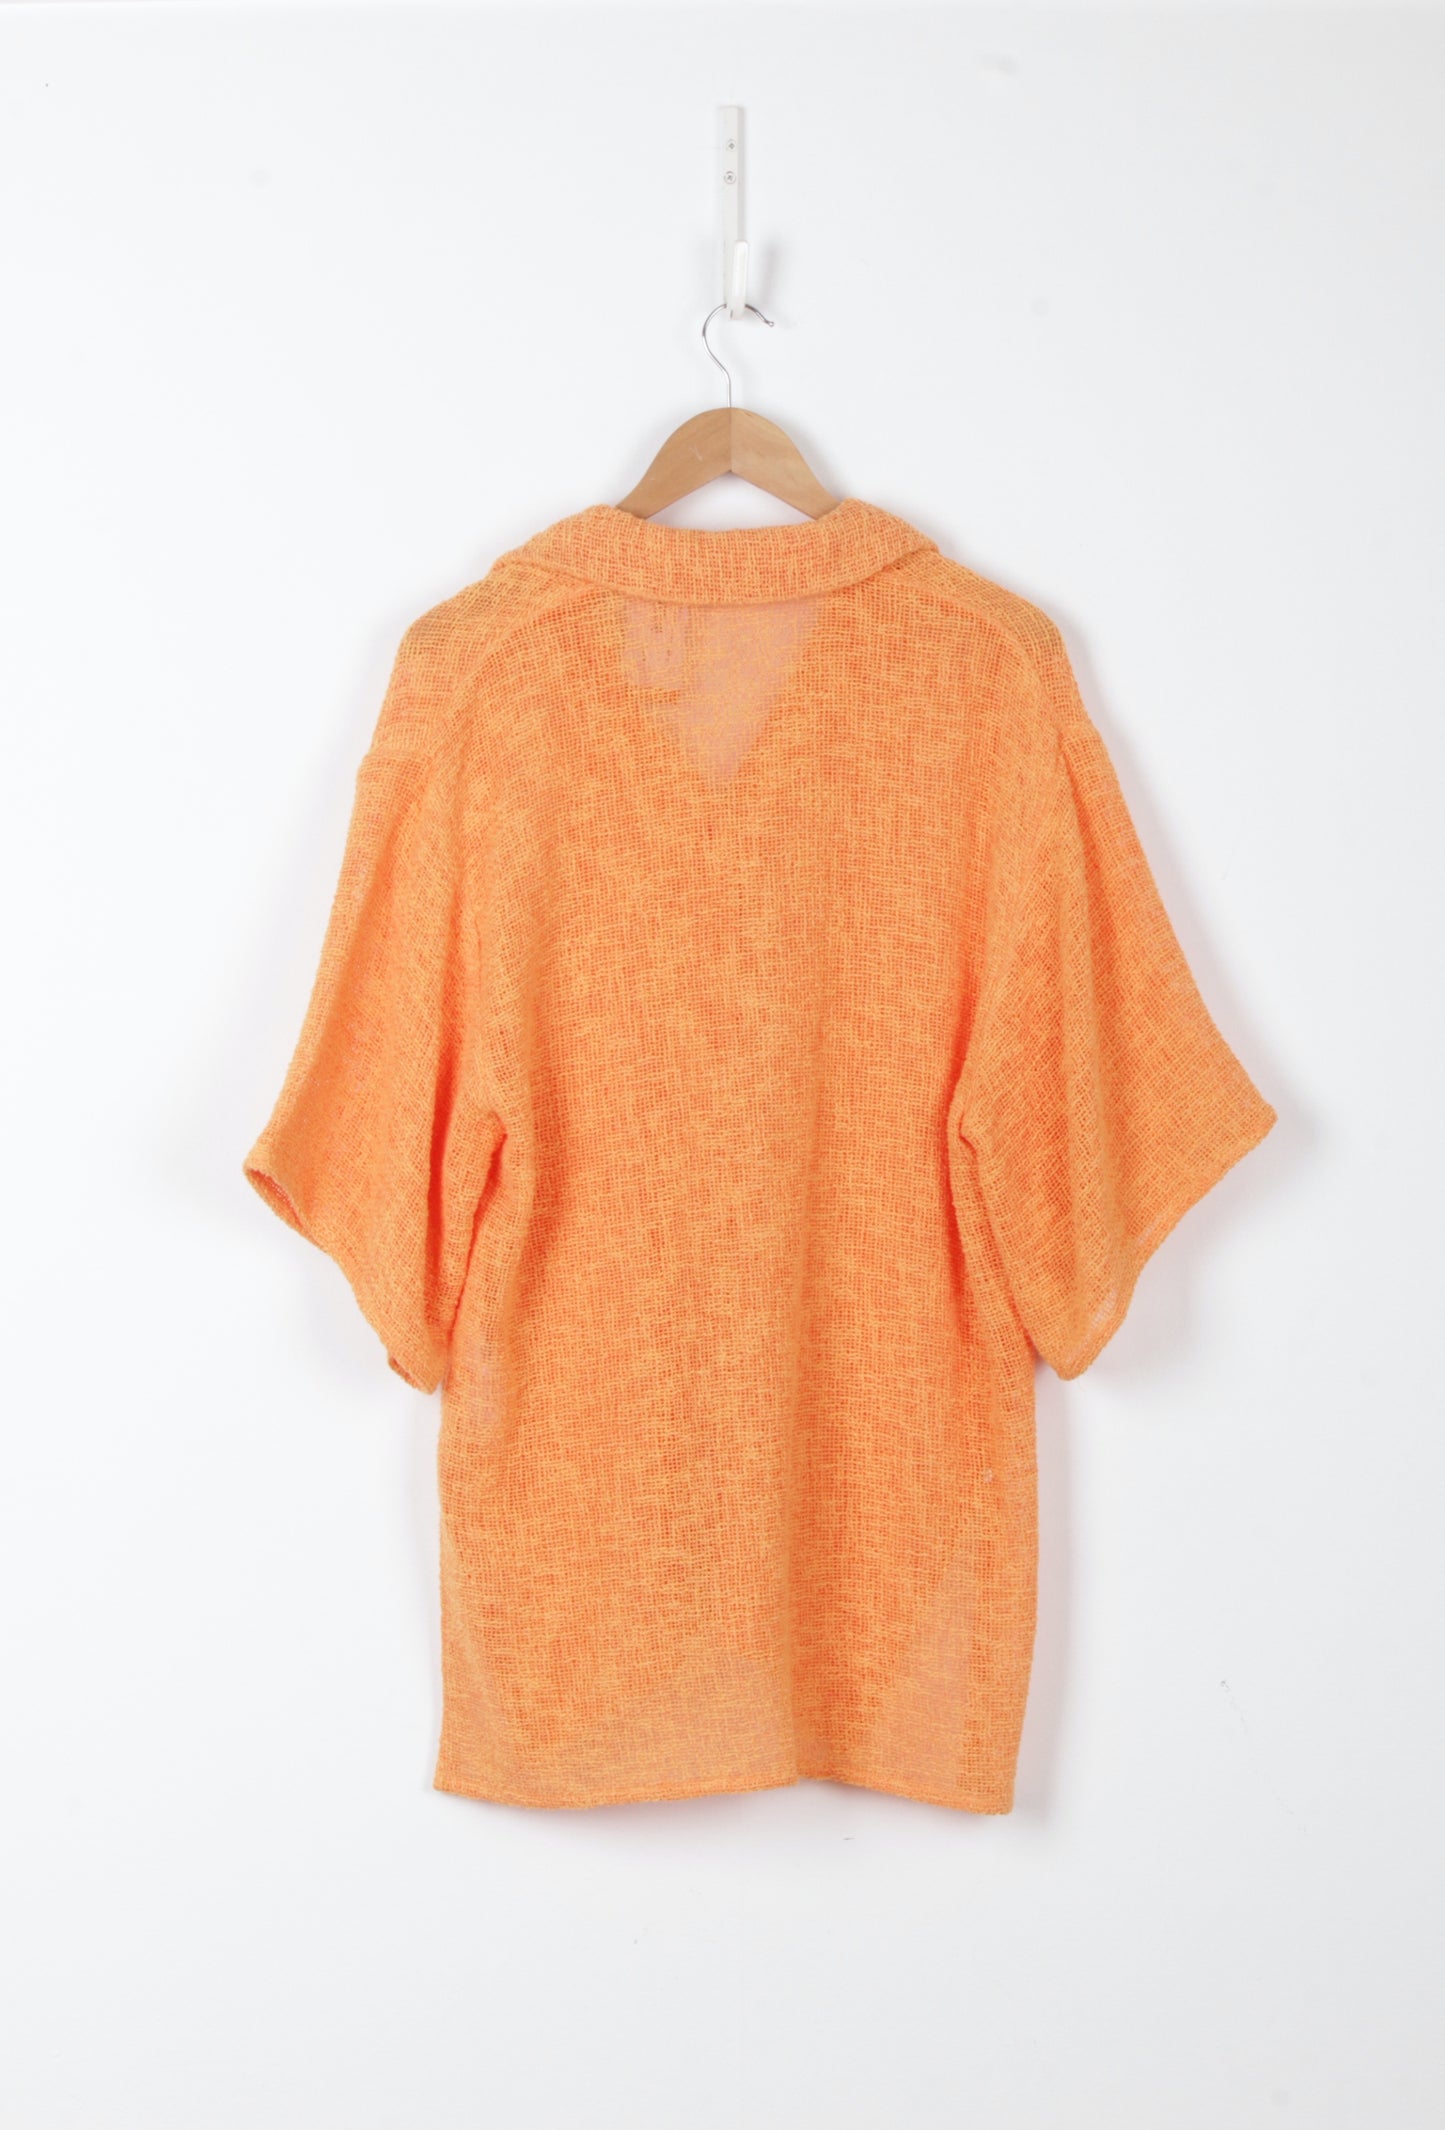 Camilla and marc Womens Orange Top Size 6